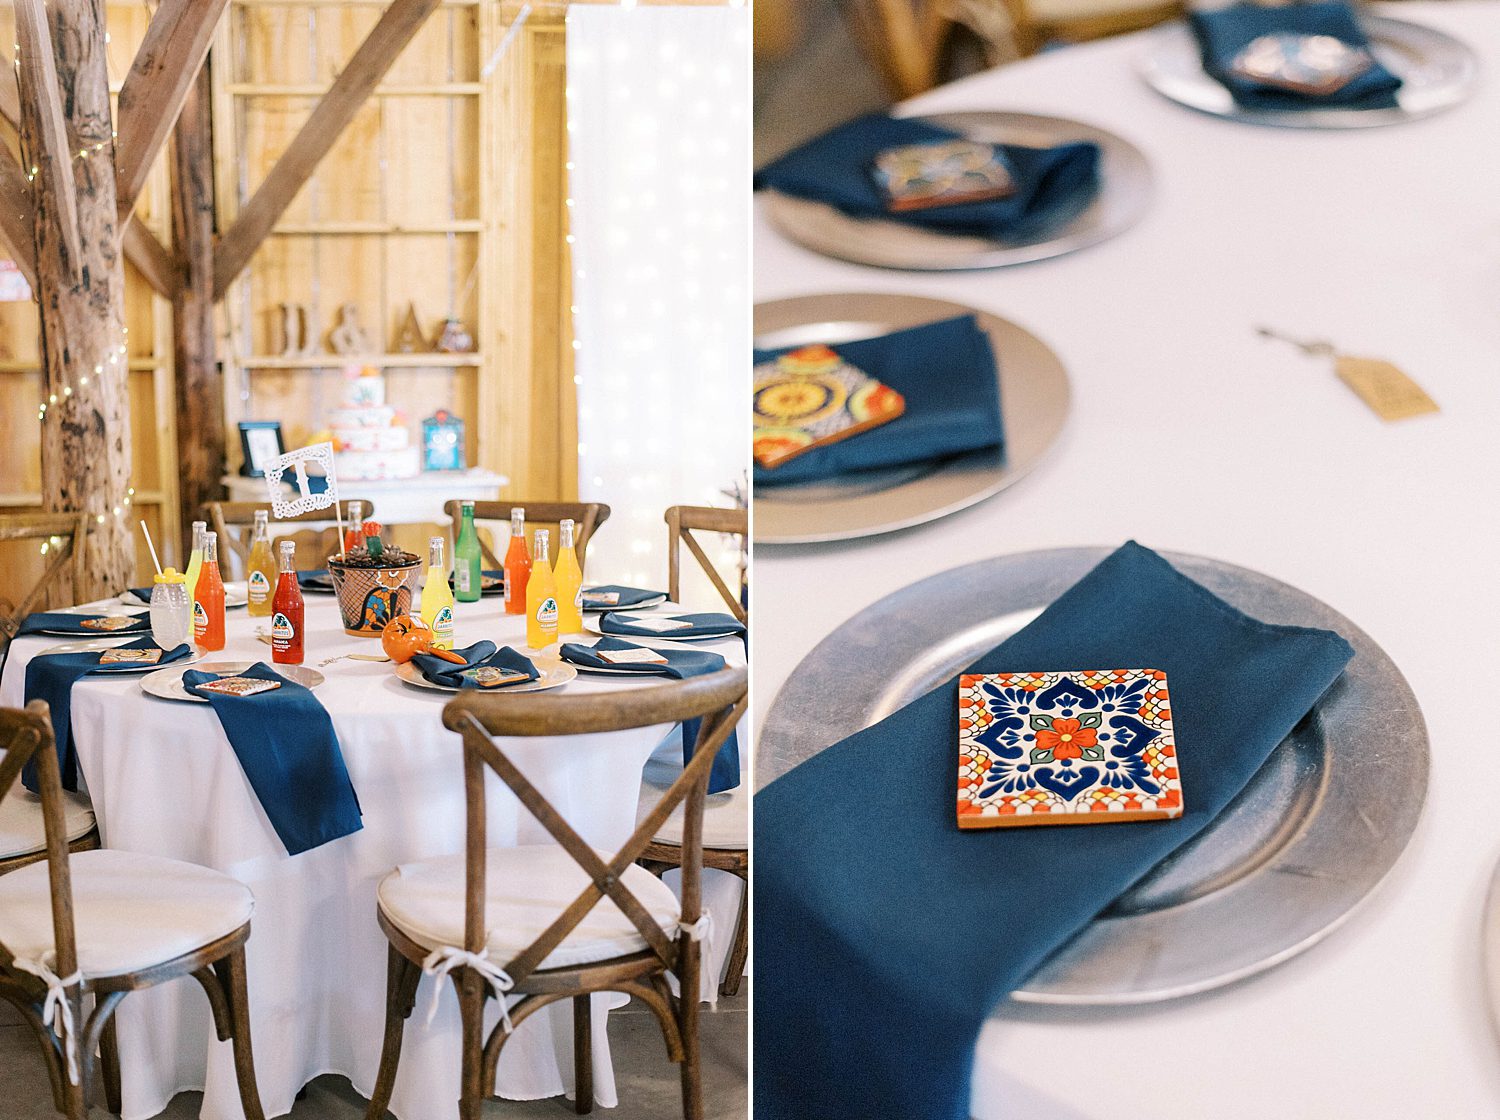 place settings with blue napkins and Mexican tiles